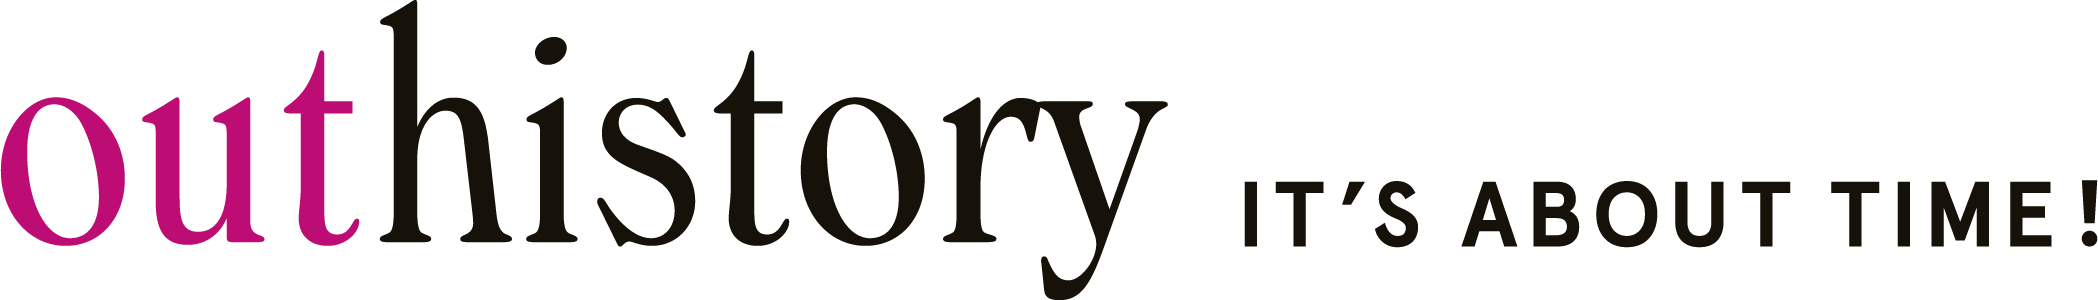 outhistory.org